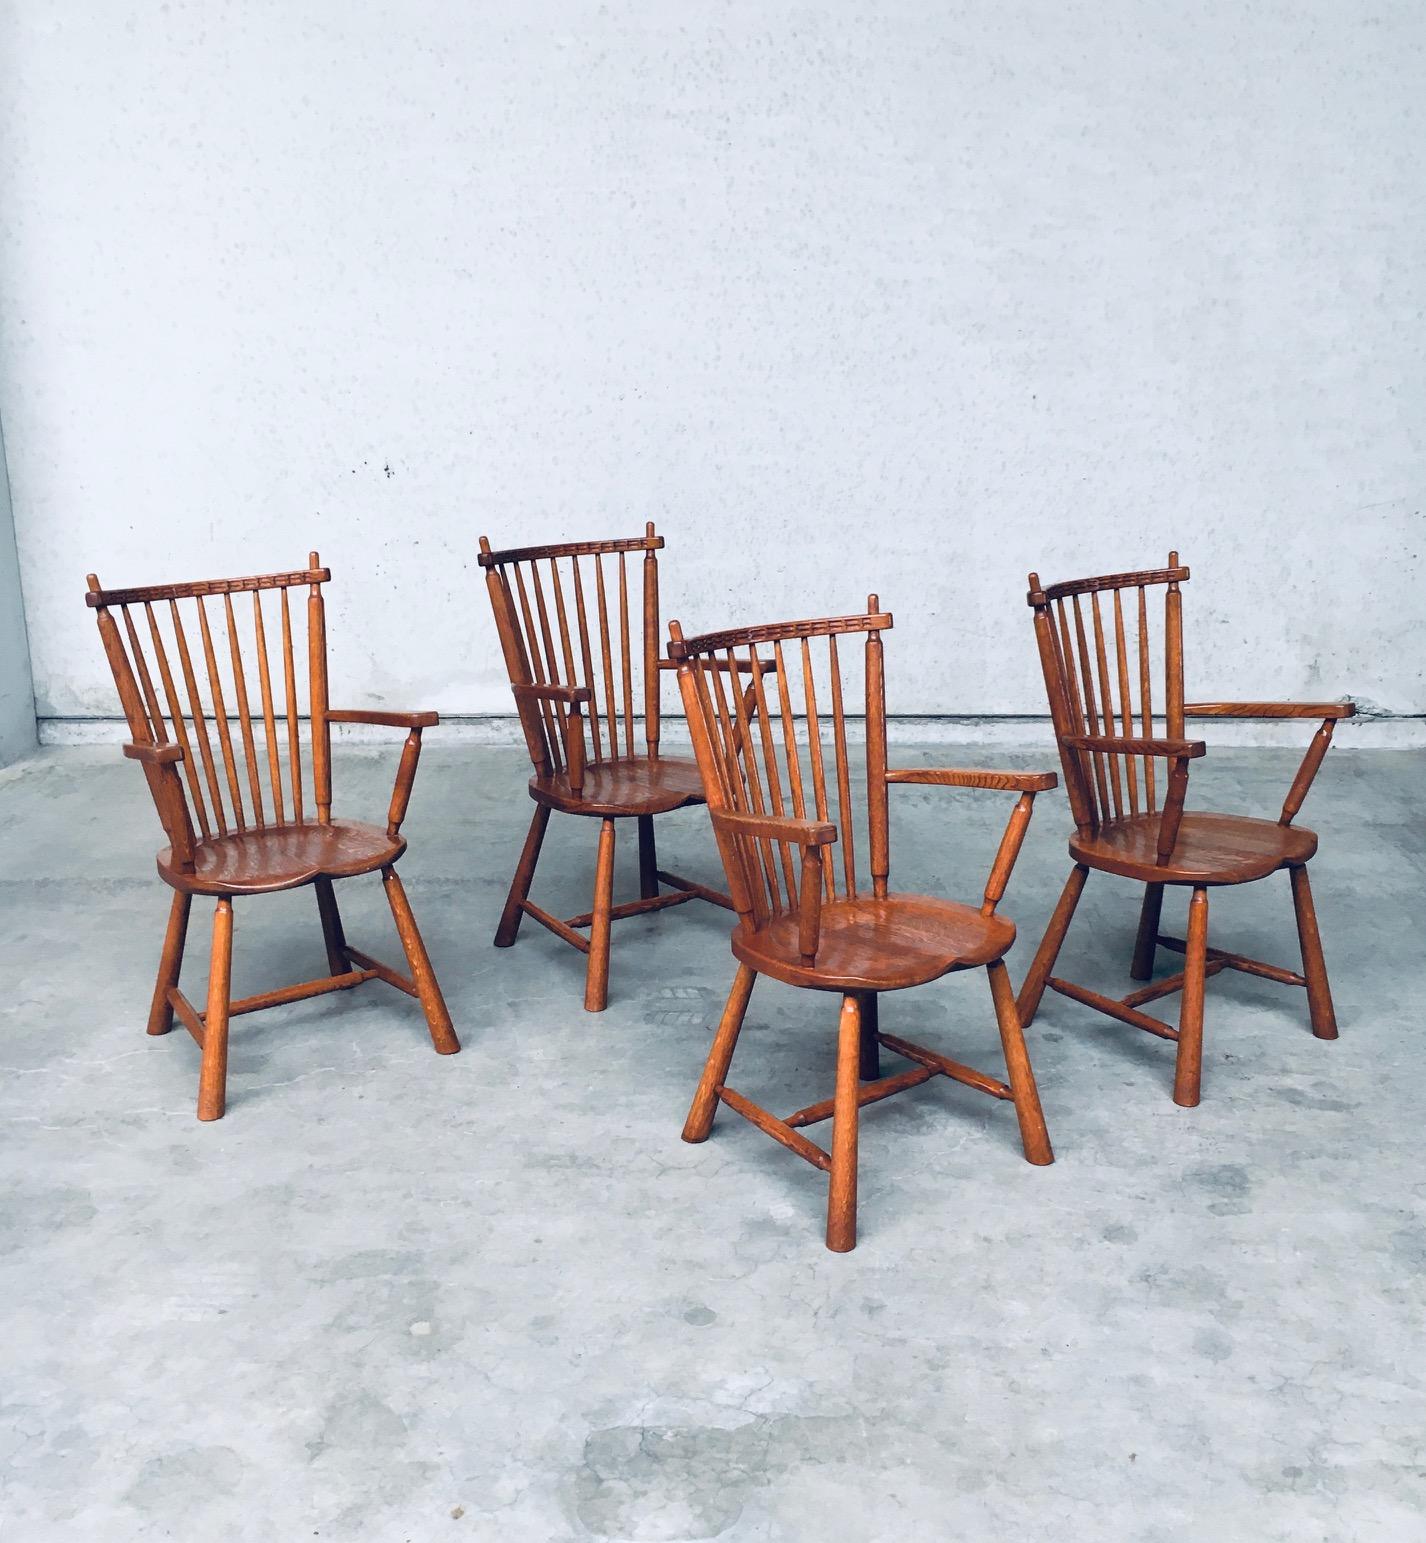 Vintage Midcentury Dutch Design Oak Arm Chair set of 4 by De Ster Gelderland. Made in the Netherlands, 1960's. Solid oak turned and carved chairs. Beautiful and shape and details. All chairs are in very good, original condition. Each chair measures